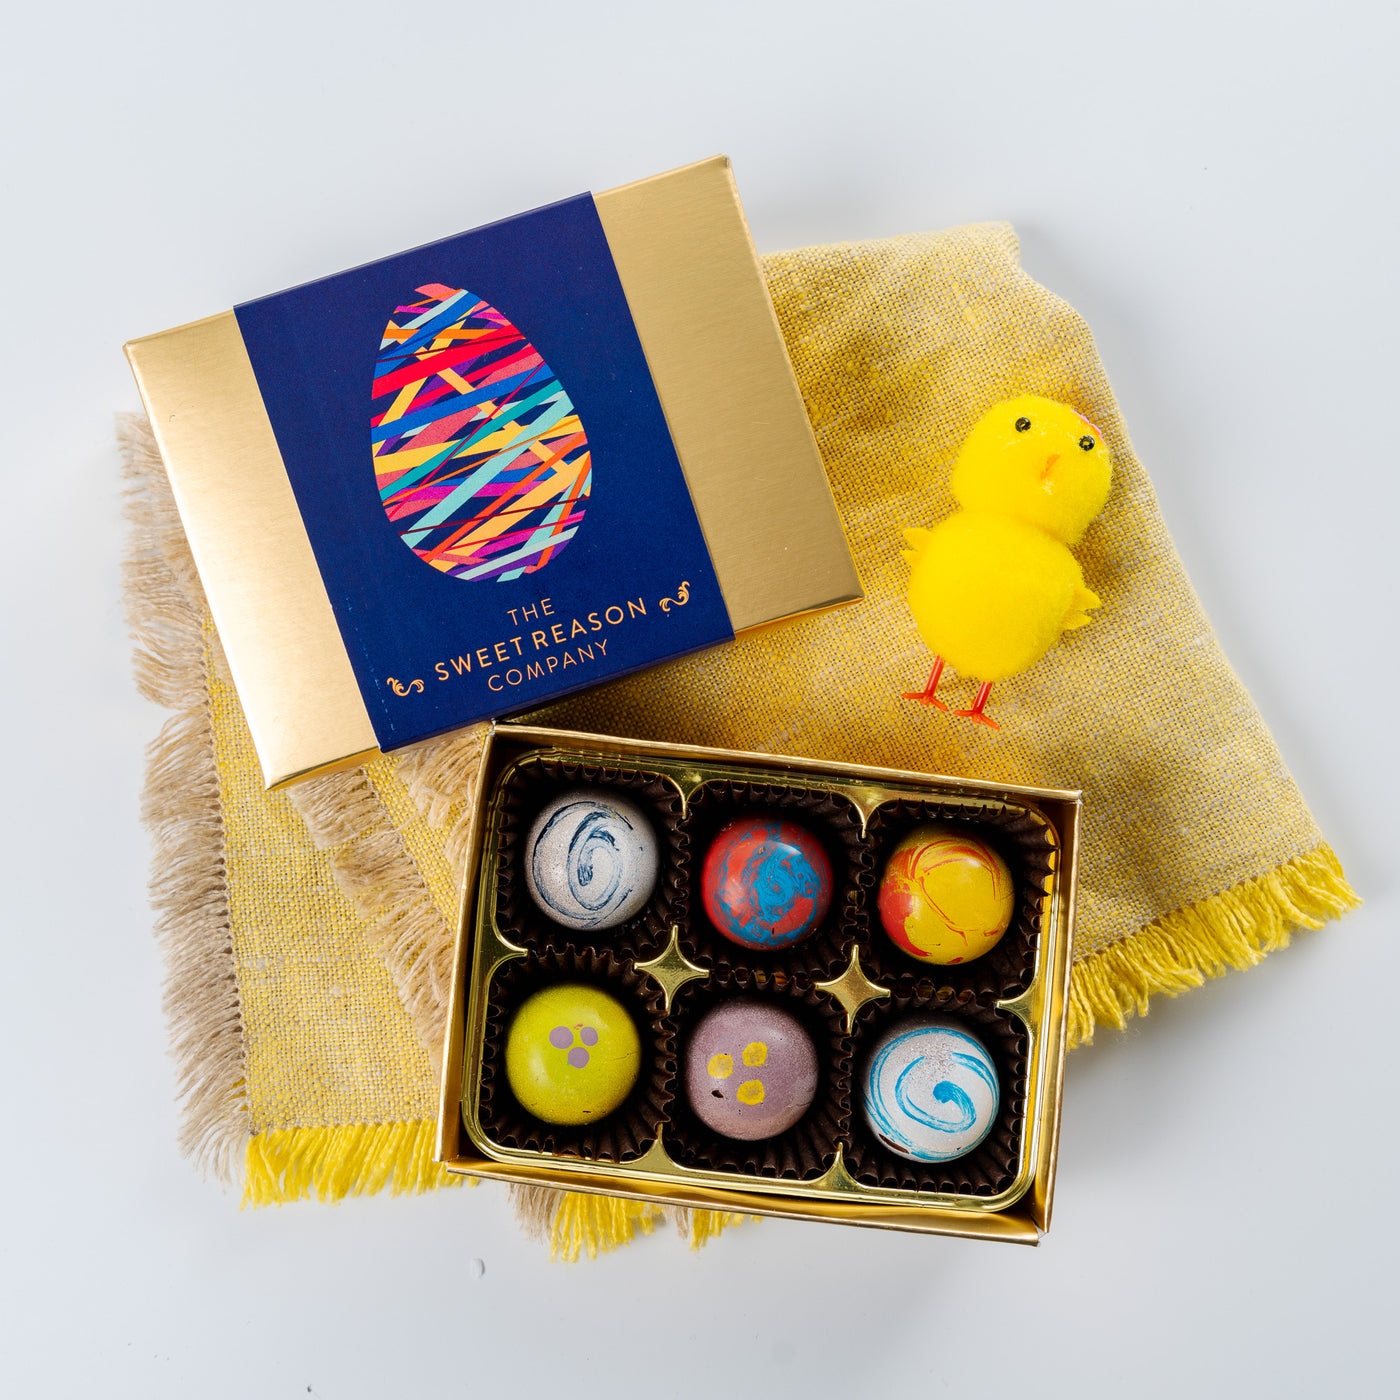 'Easter Egg' Box of 6 Chocolates (Salted Caramel filling)